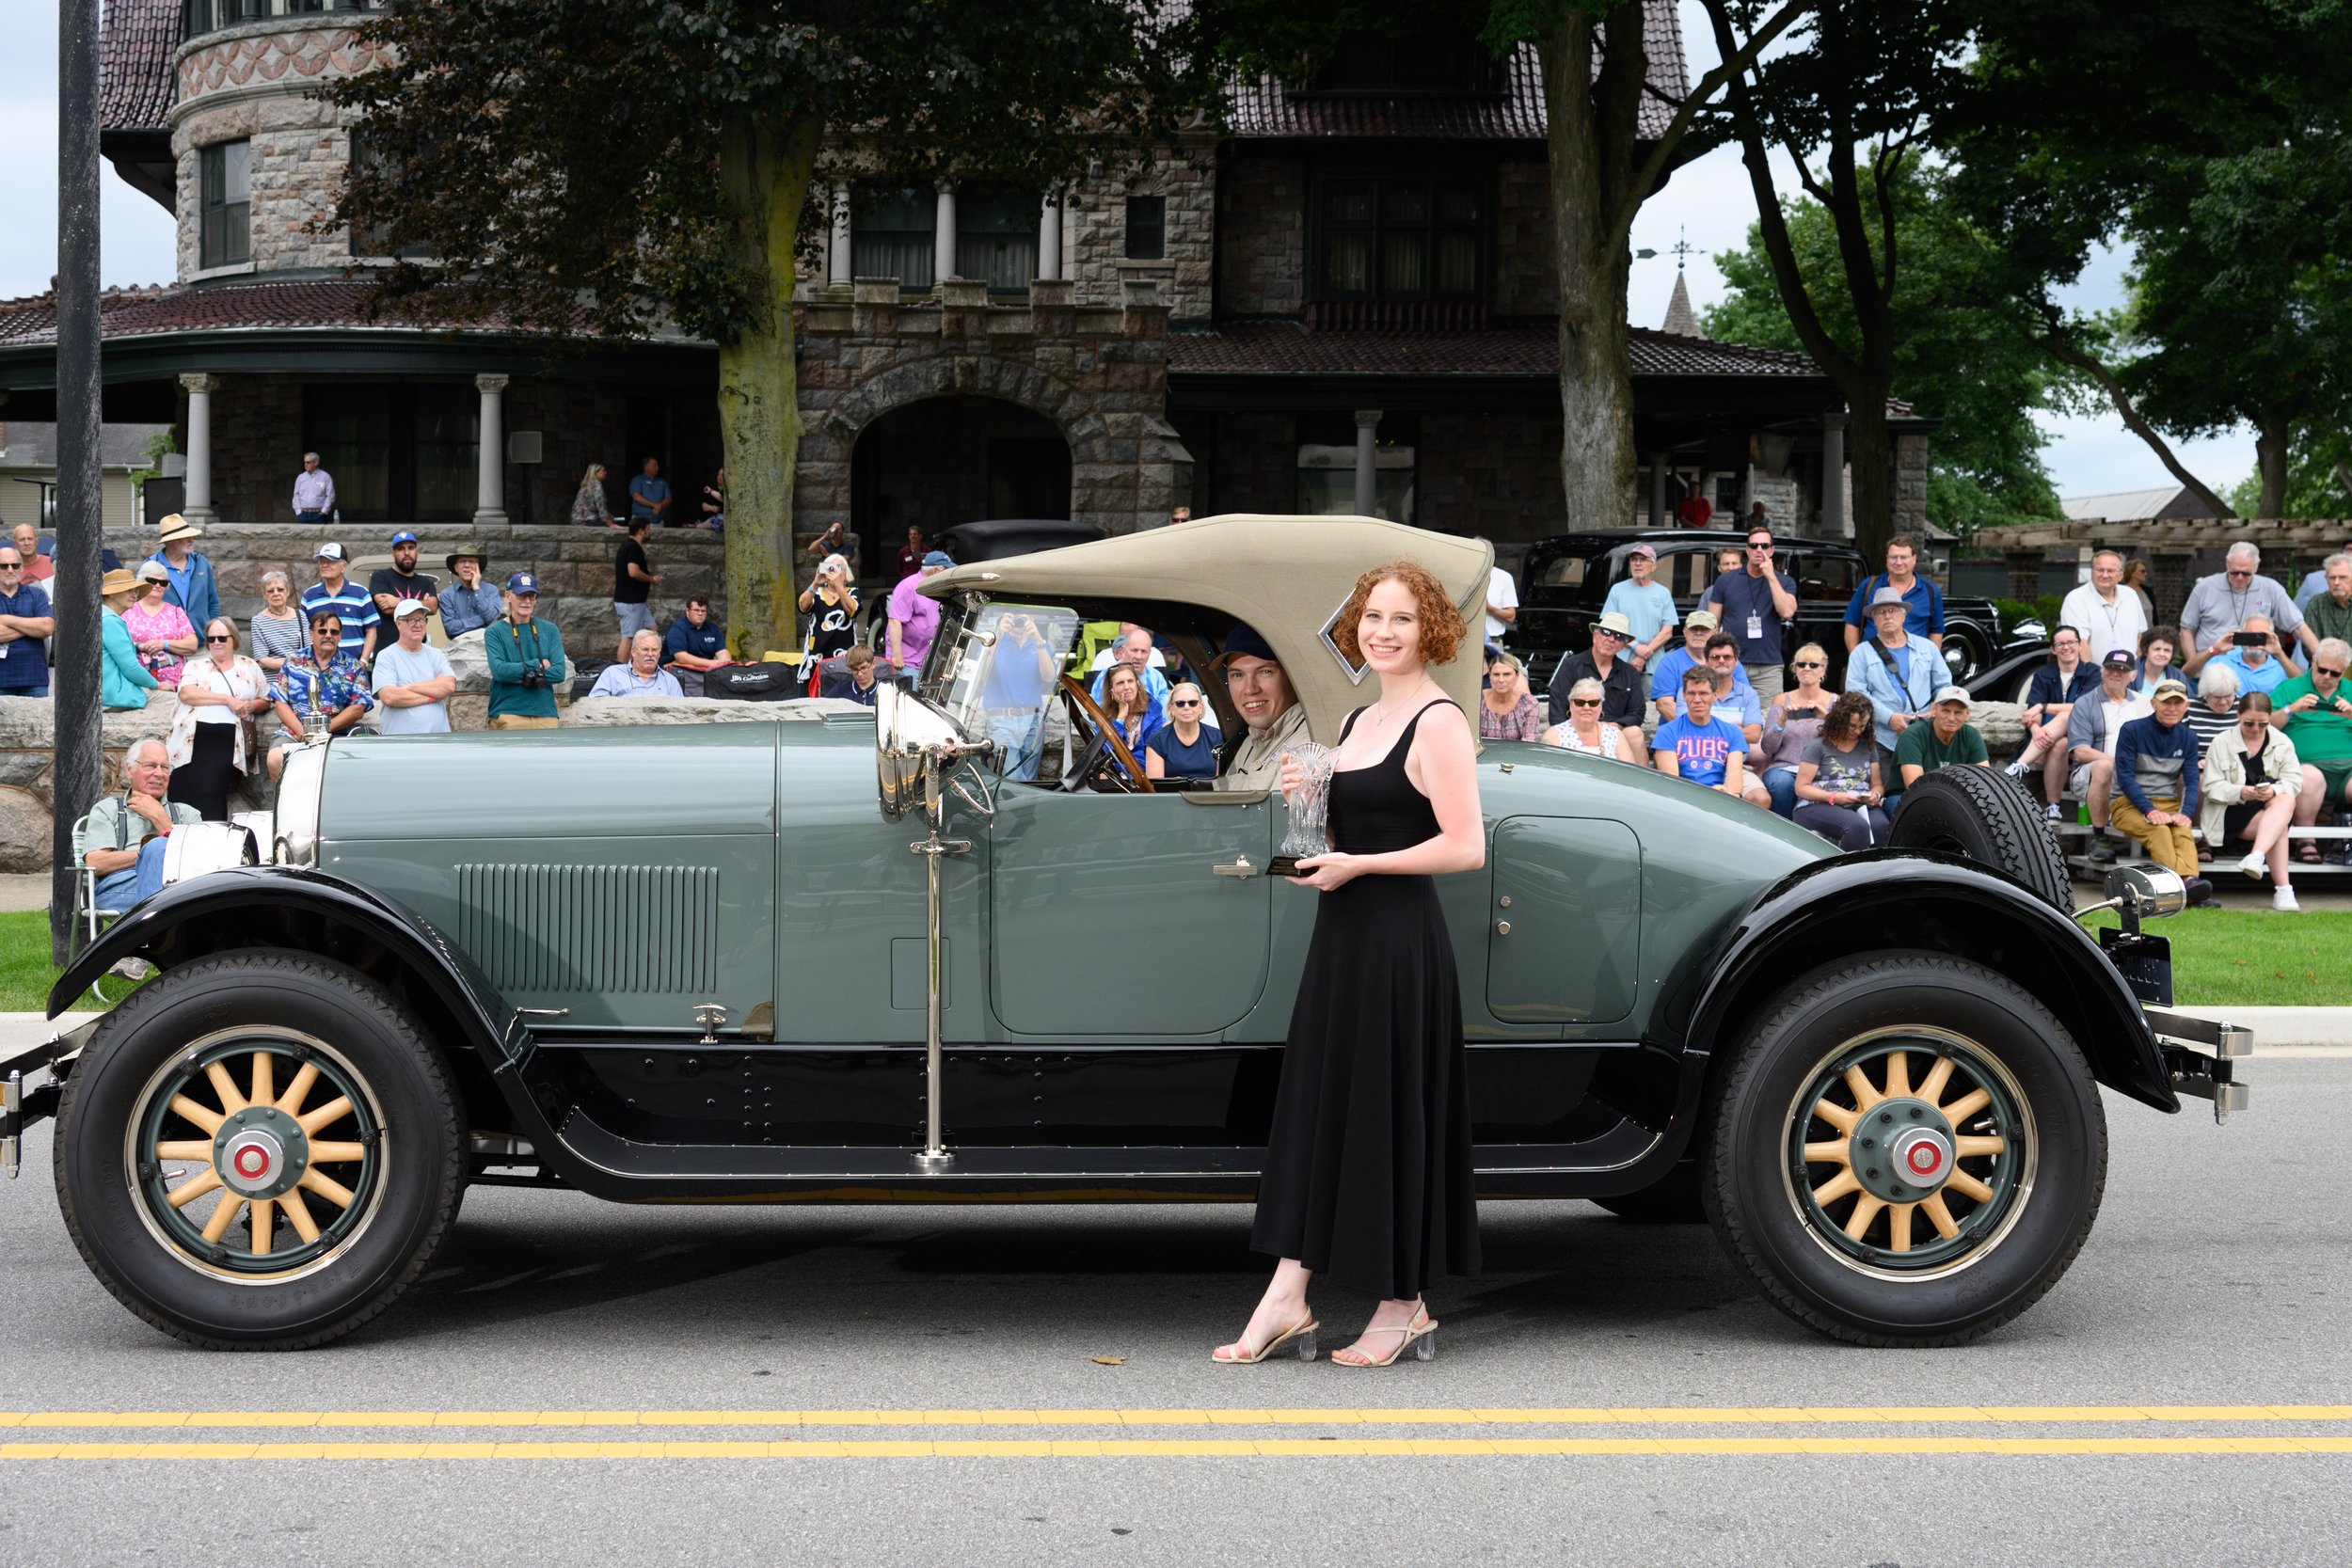 1924 Marmon 34 C Roadster, Mary and Ted Stahl